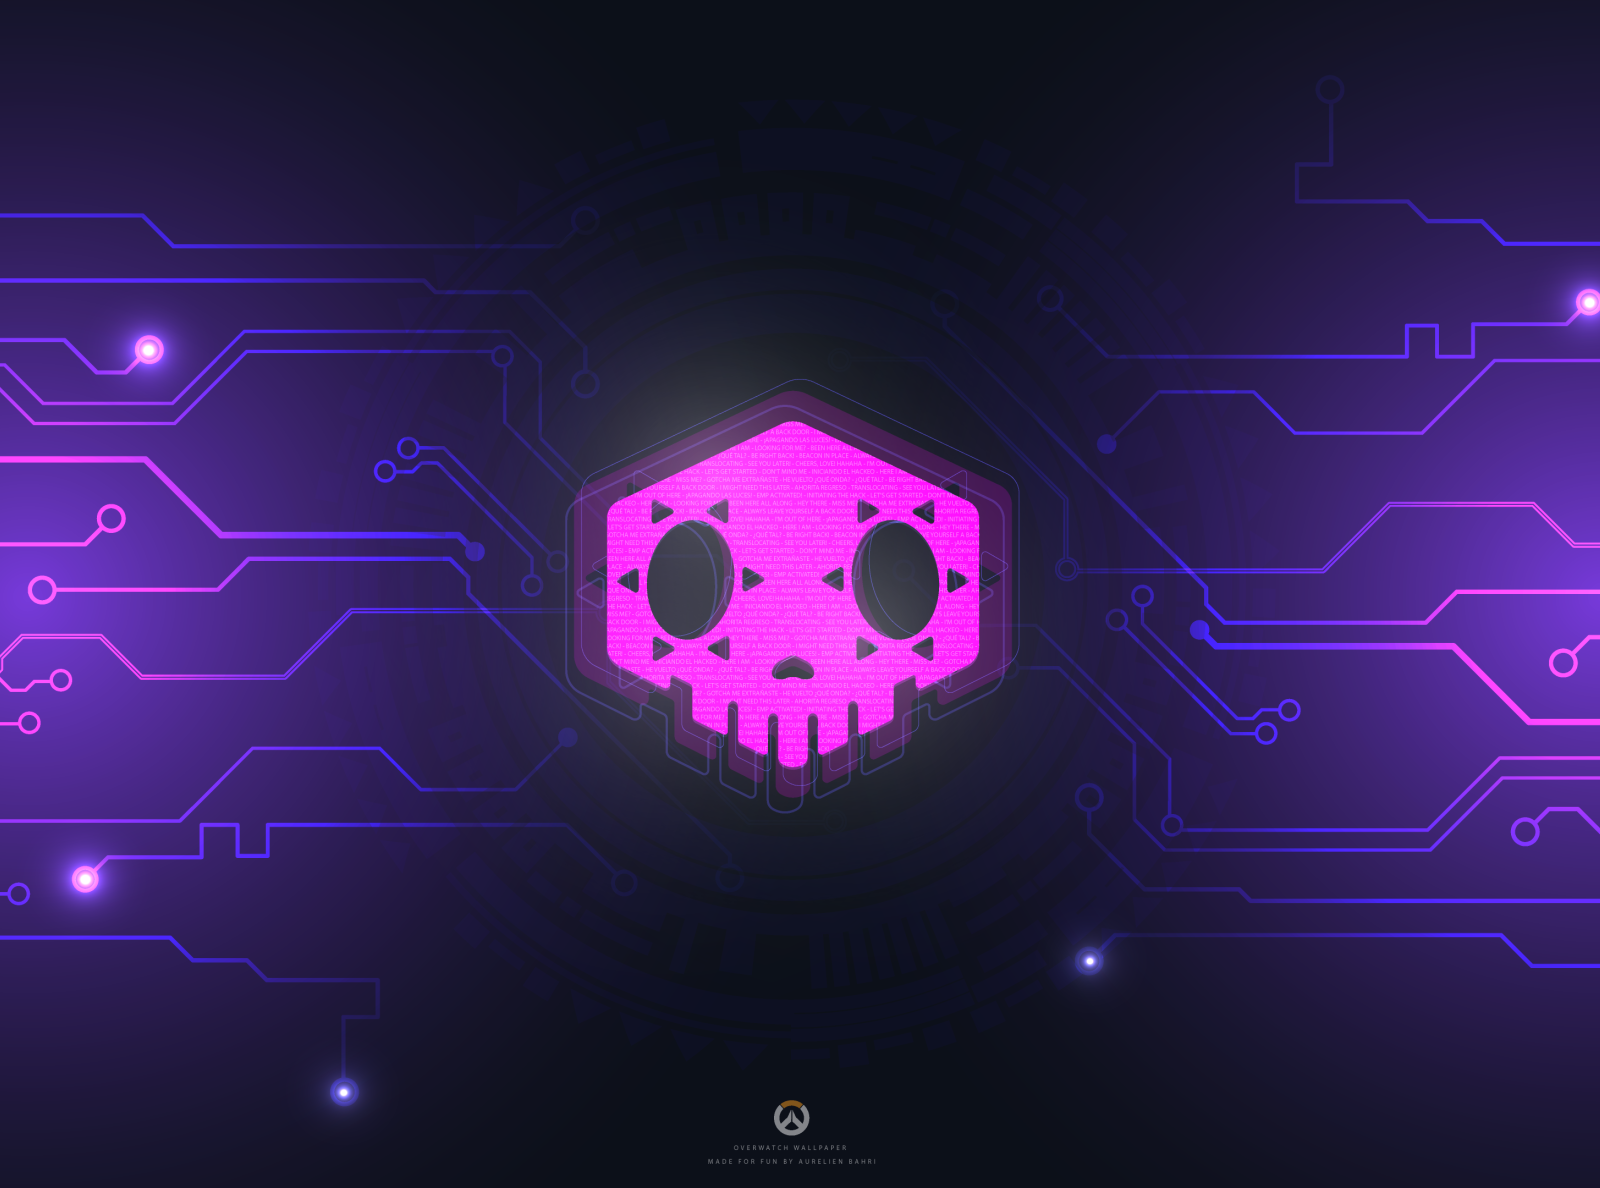 Sombra In Overwatch Game 4K Ultra HD Mobile Wallpaper